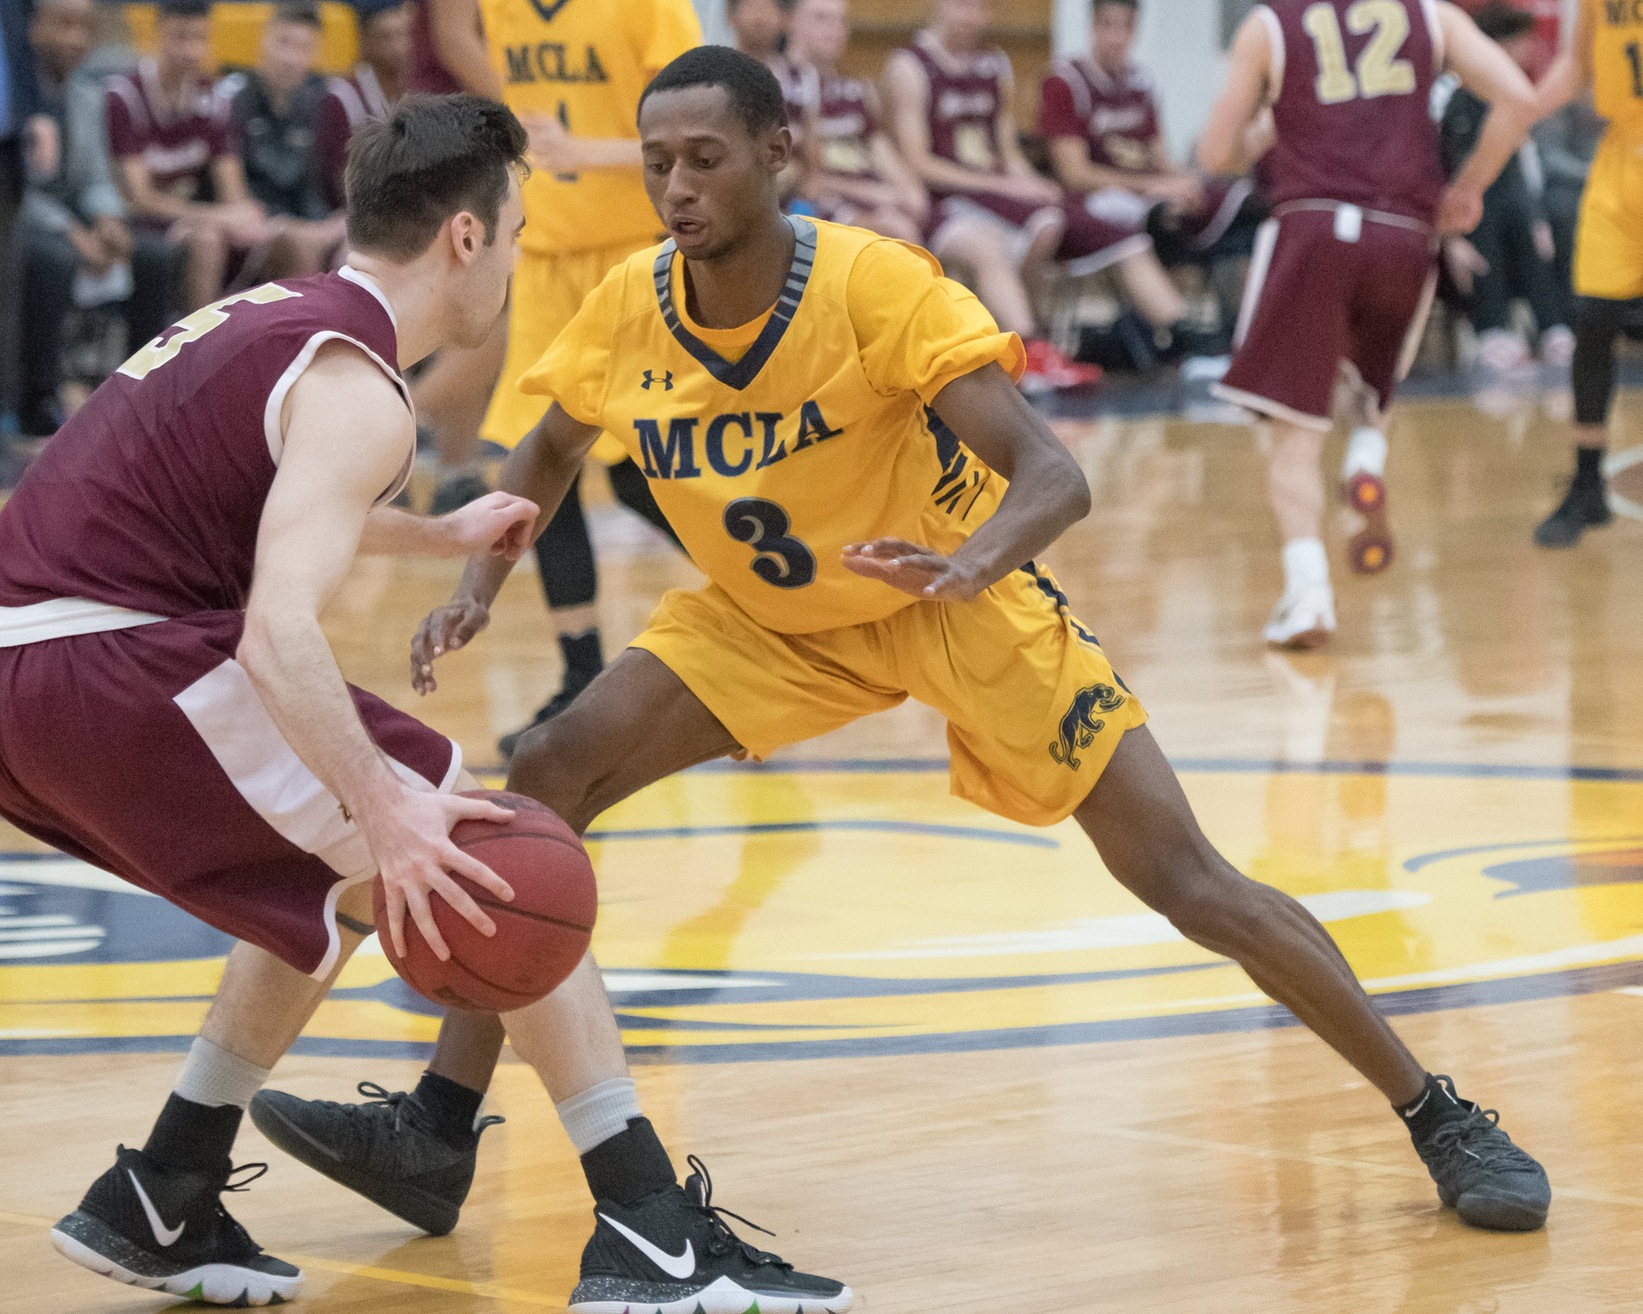 MCLA men's basketball falls at home to Bears in MASCAC action